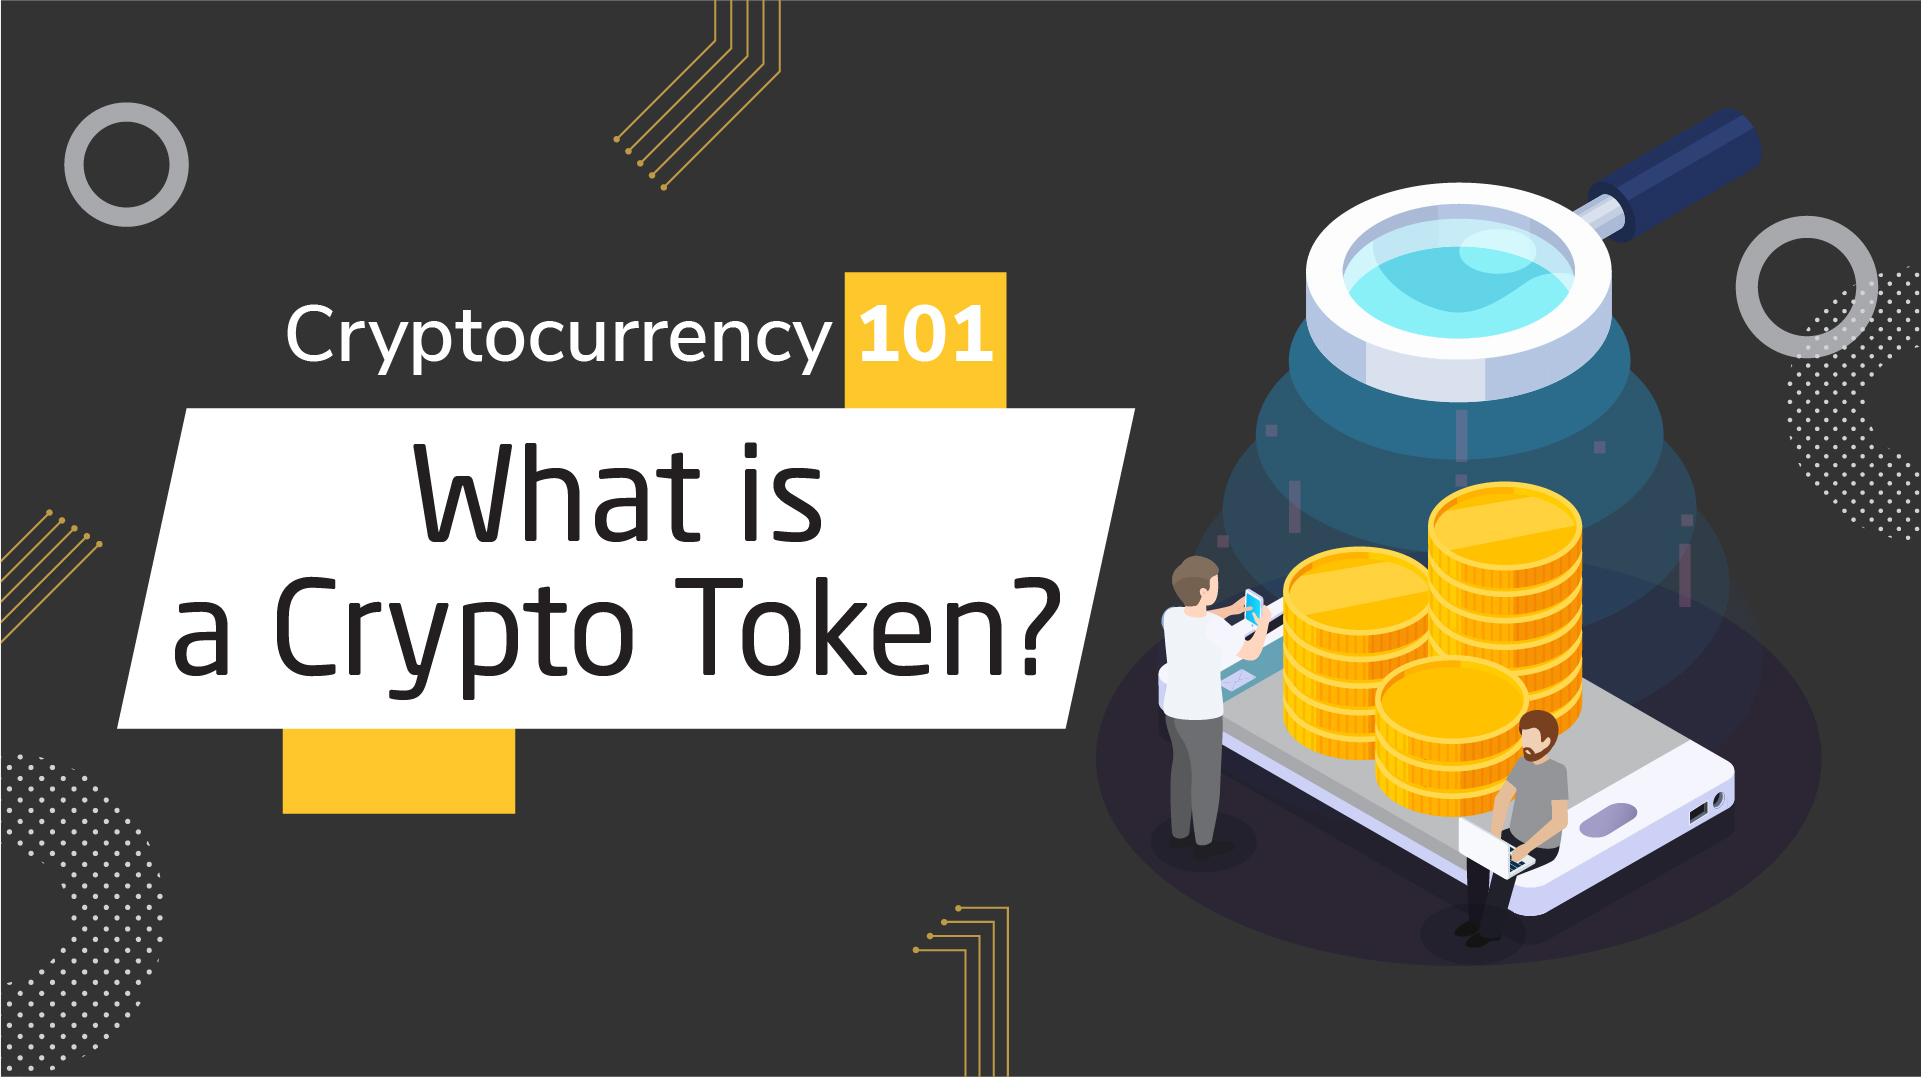 how to launch your own crypto token